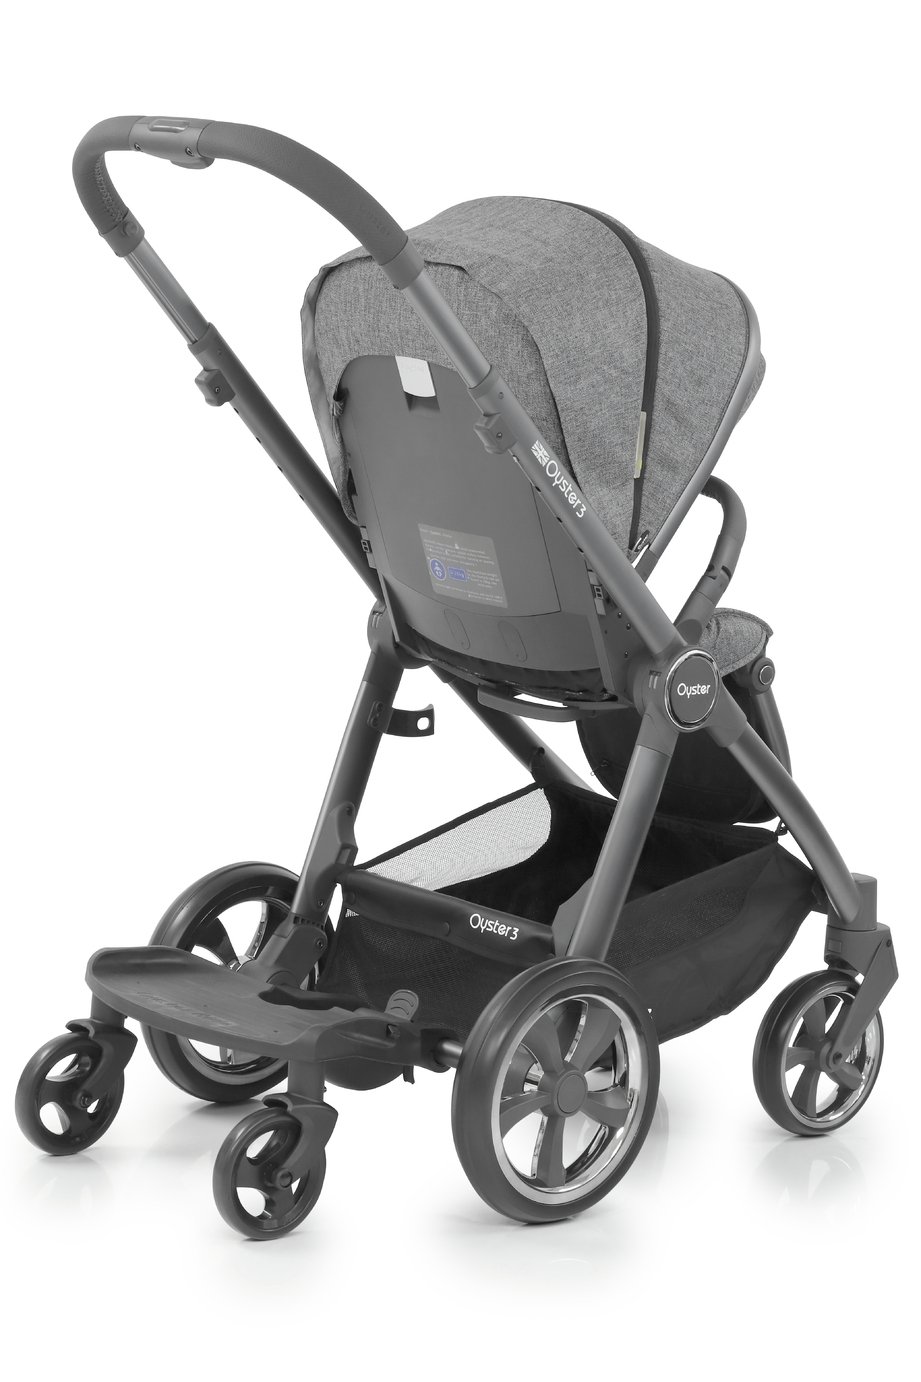 Oyster 3 Pushchair Ride On Board Review